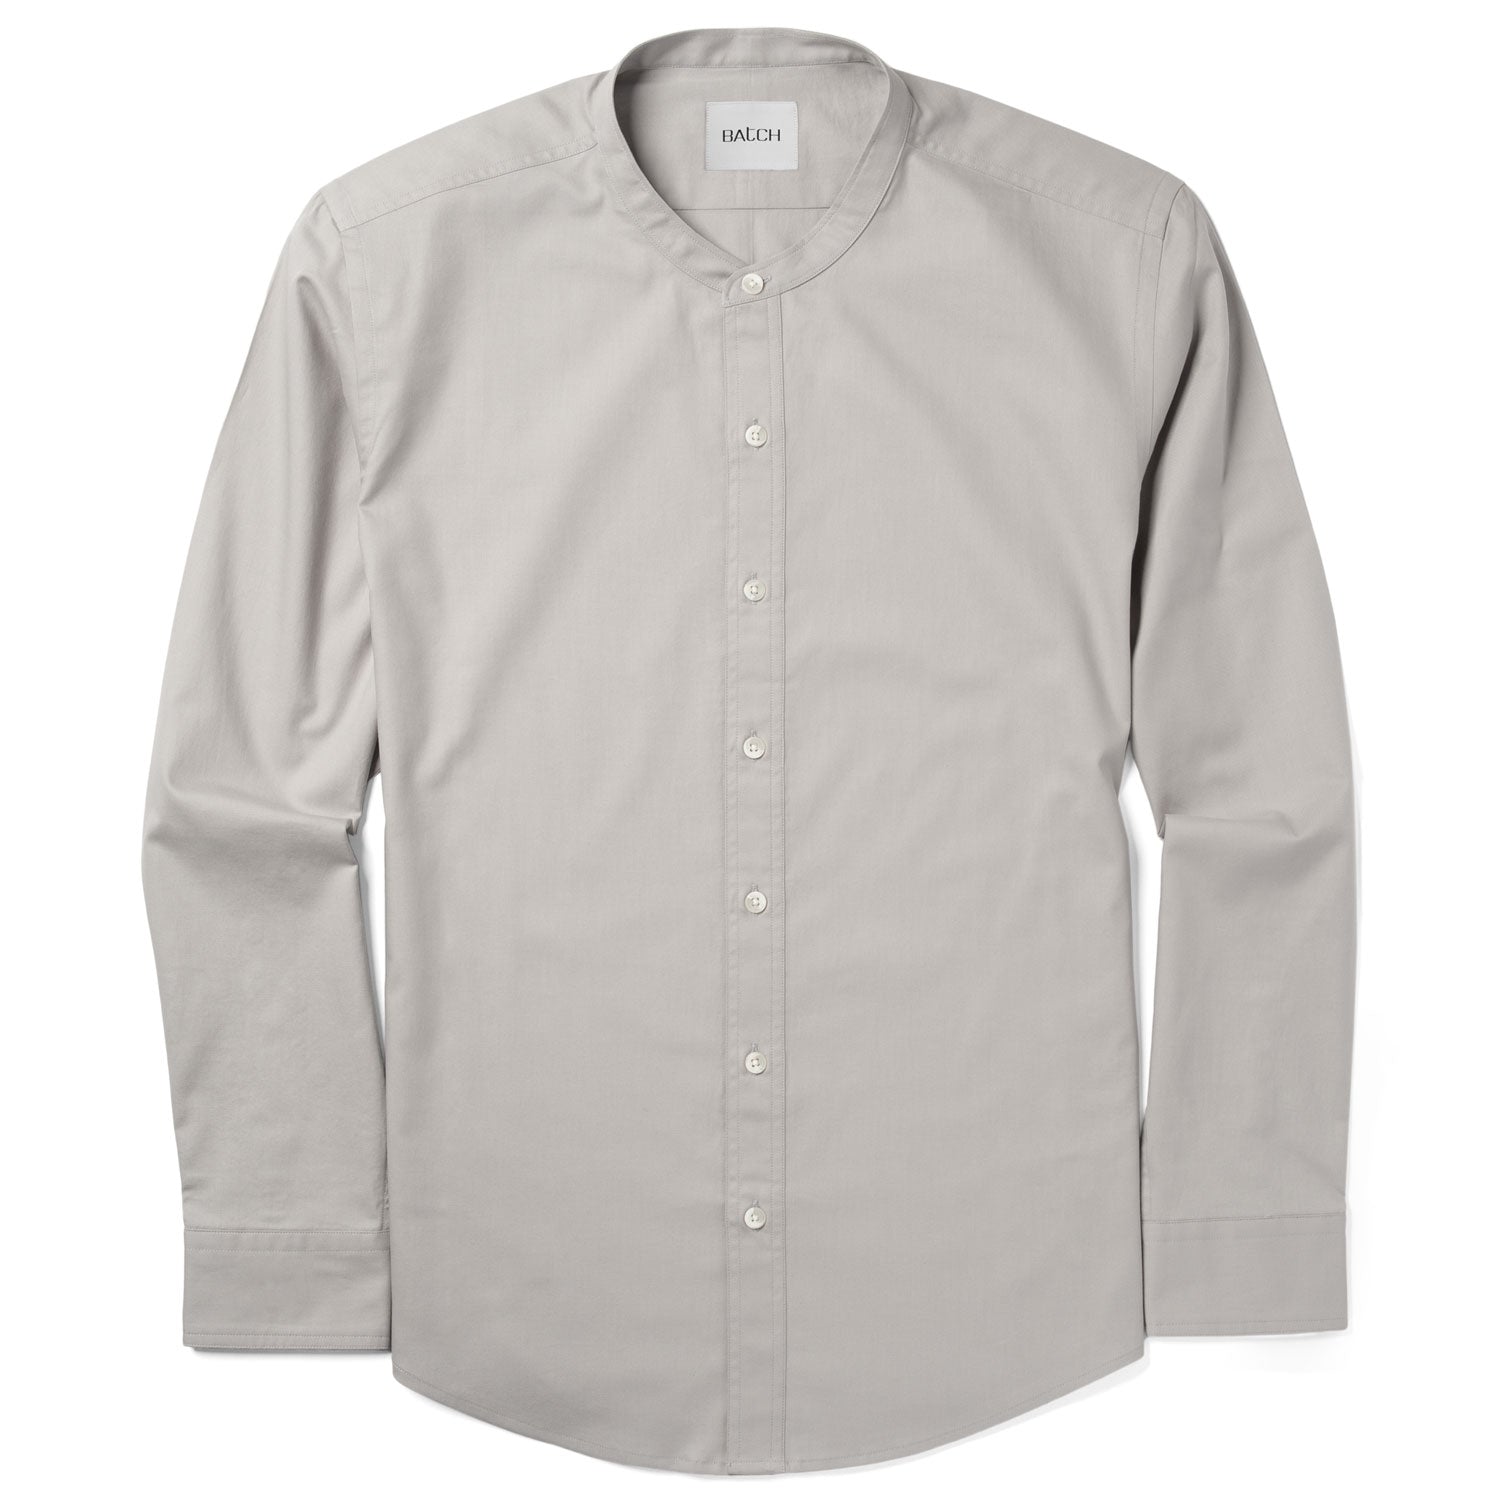 Essential Band Collar Button Down Shirt - Cement Gray Cotton Twill